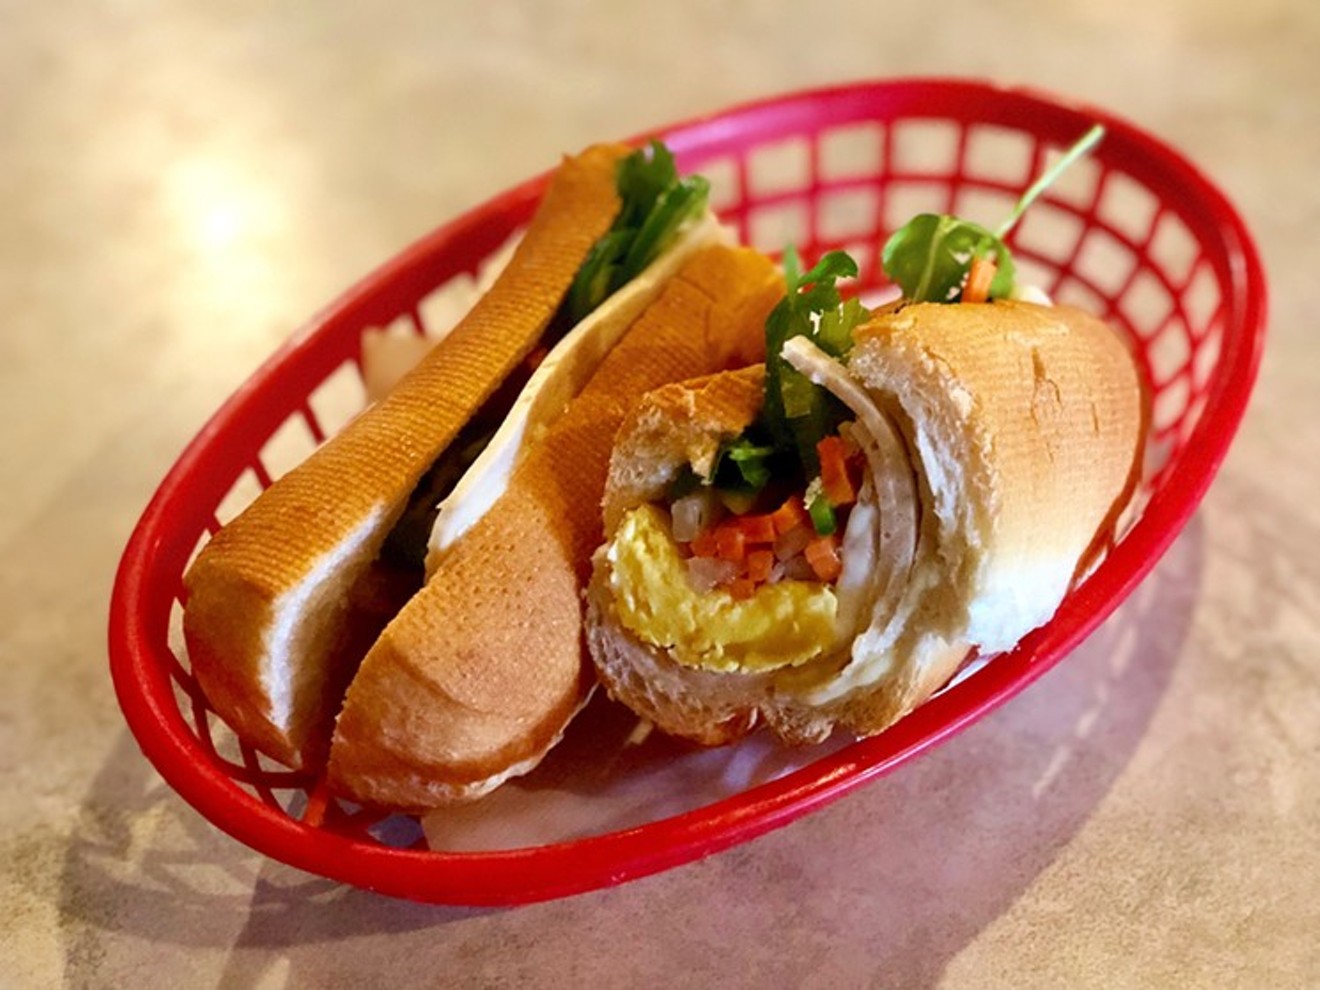 Pho Pasteur 2's banh mi ($4) are among Carrollton's best.